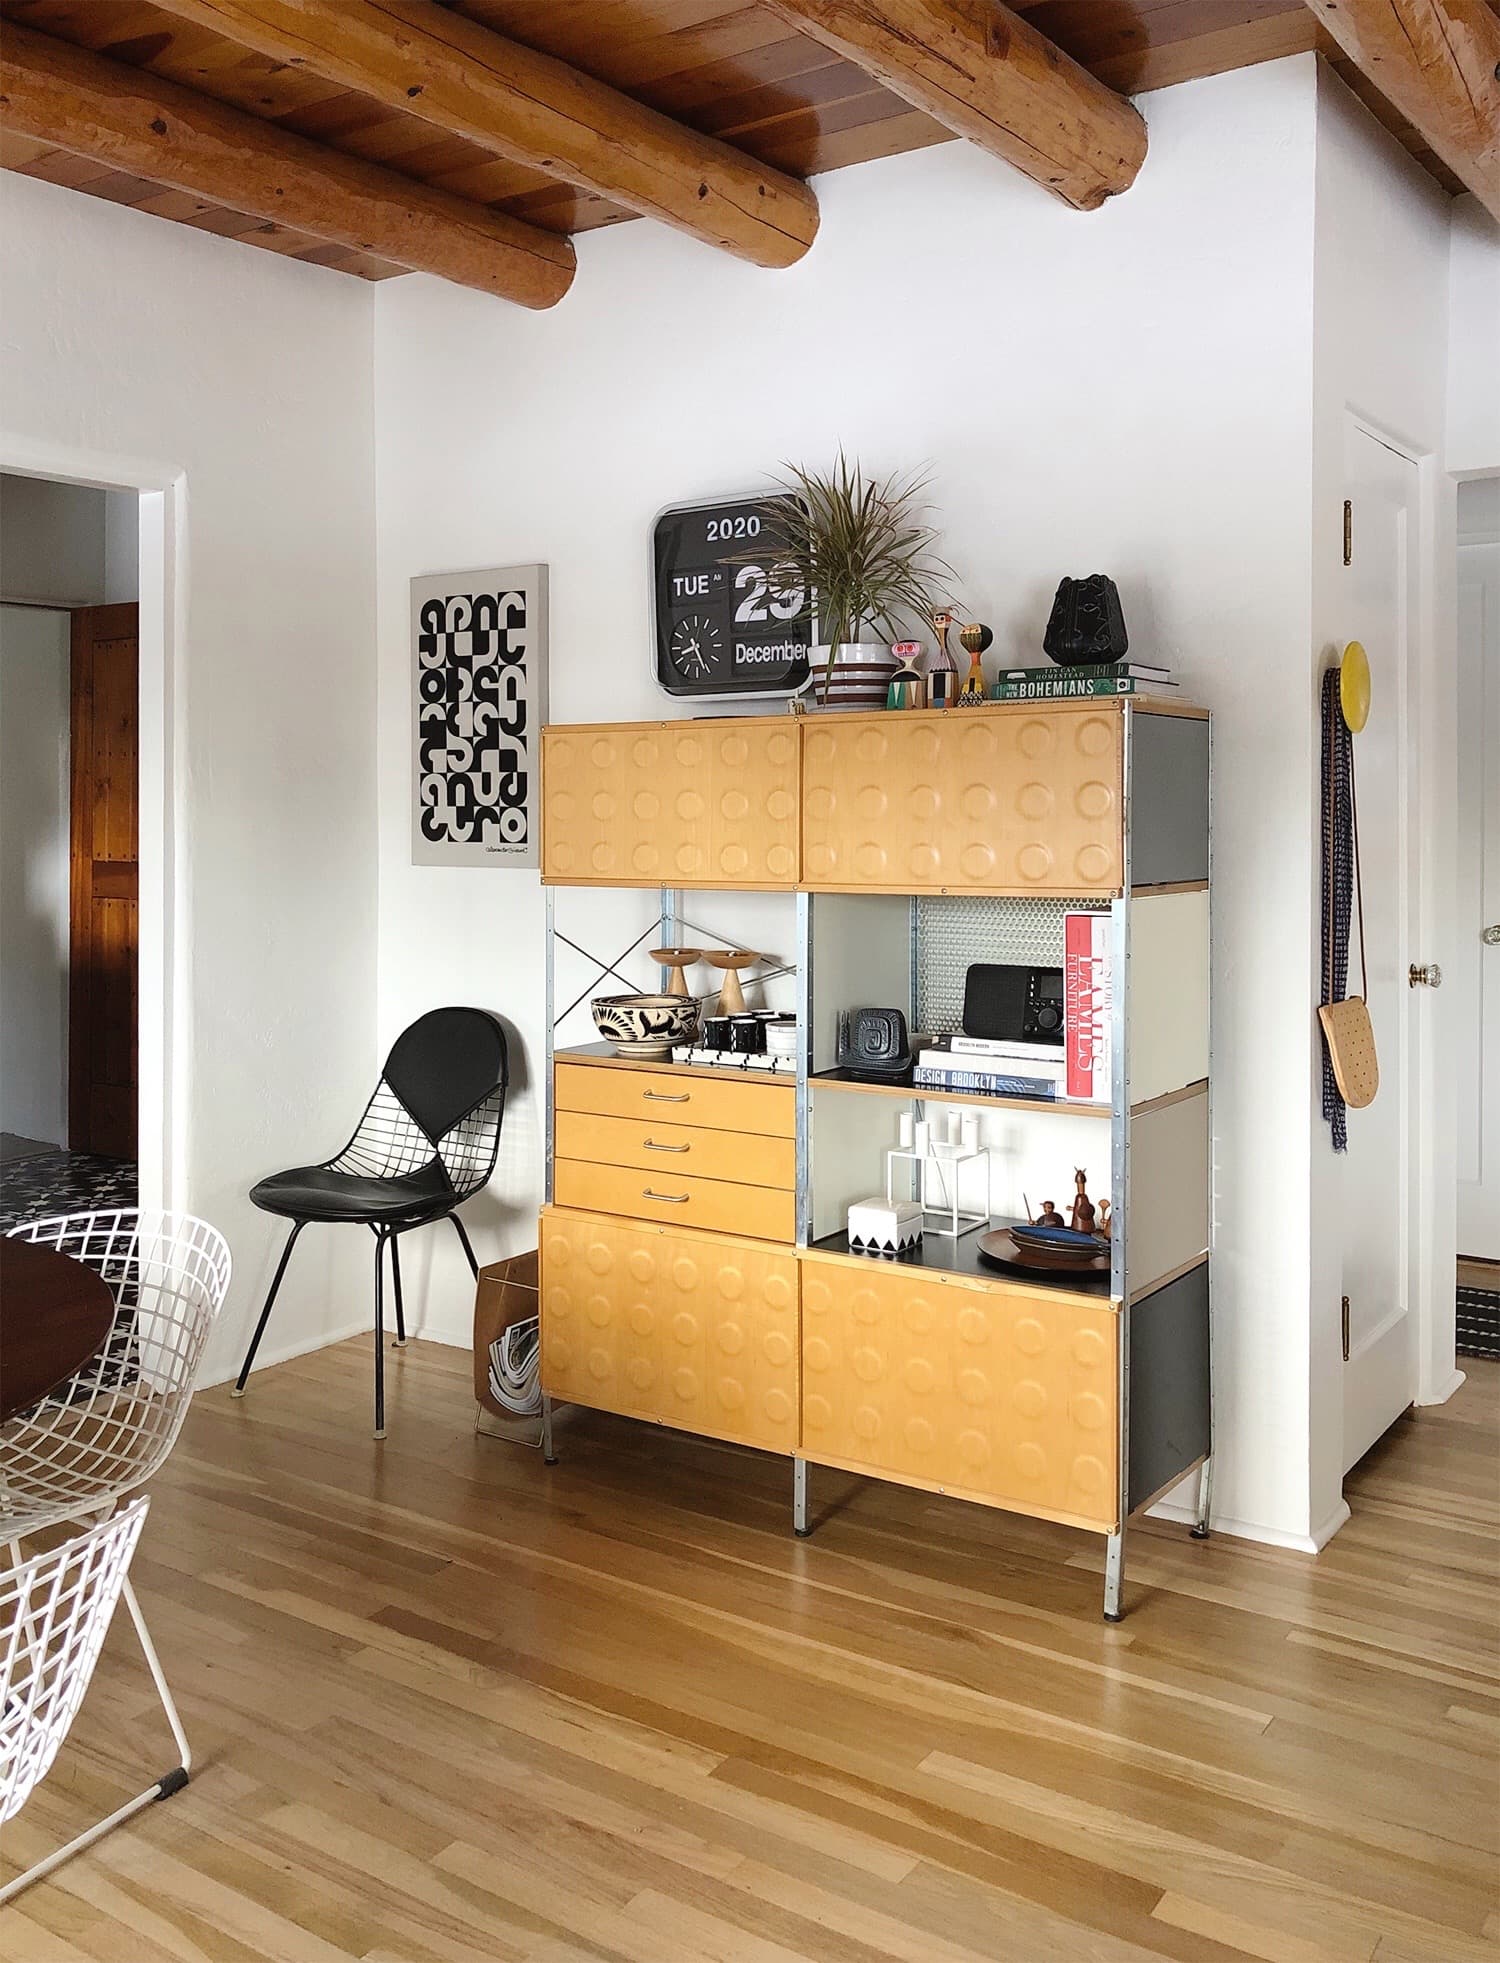 Eames Storage Unit in dining room